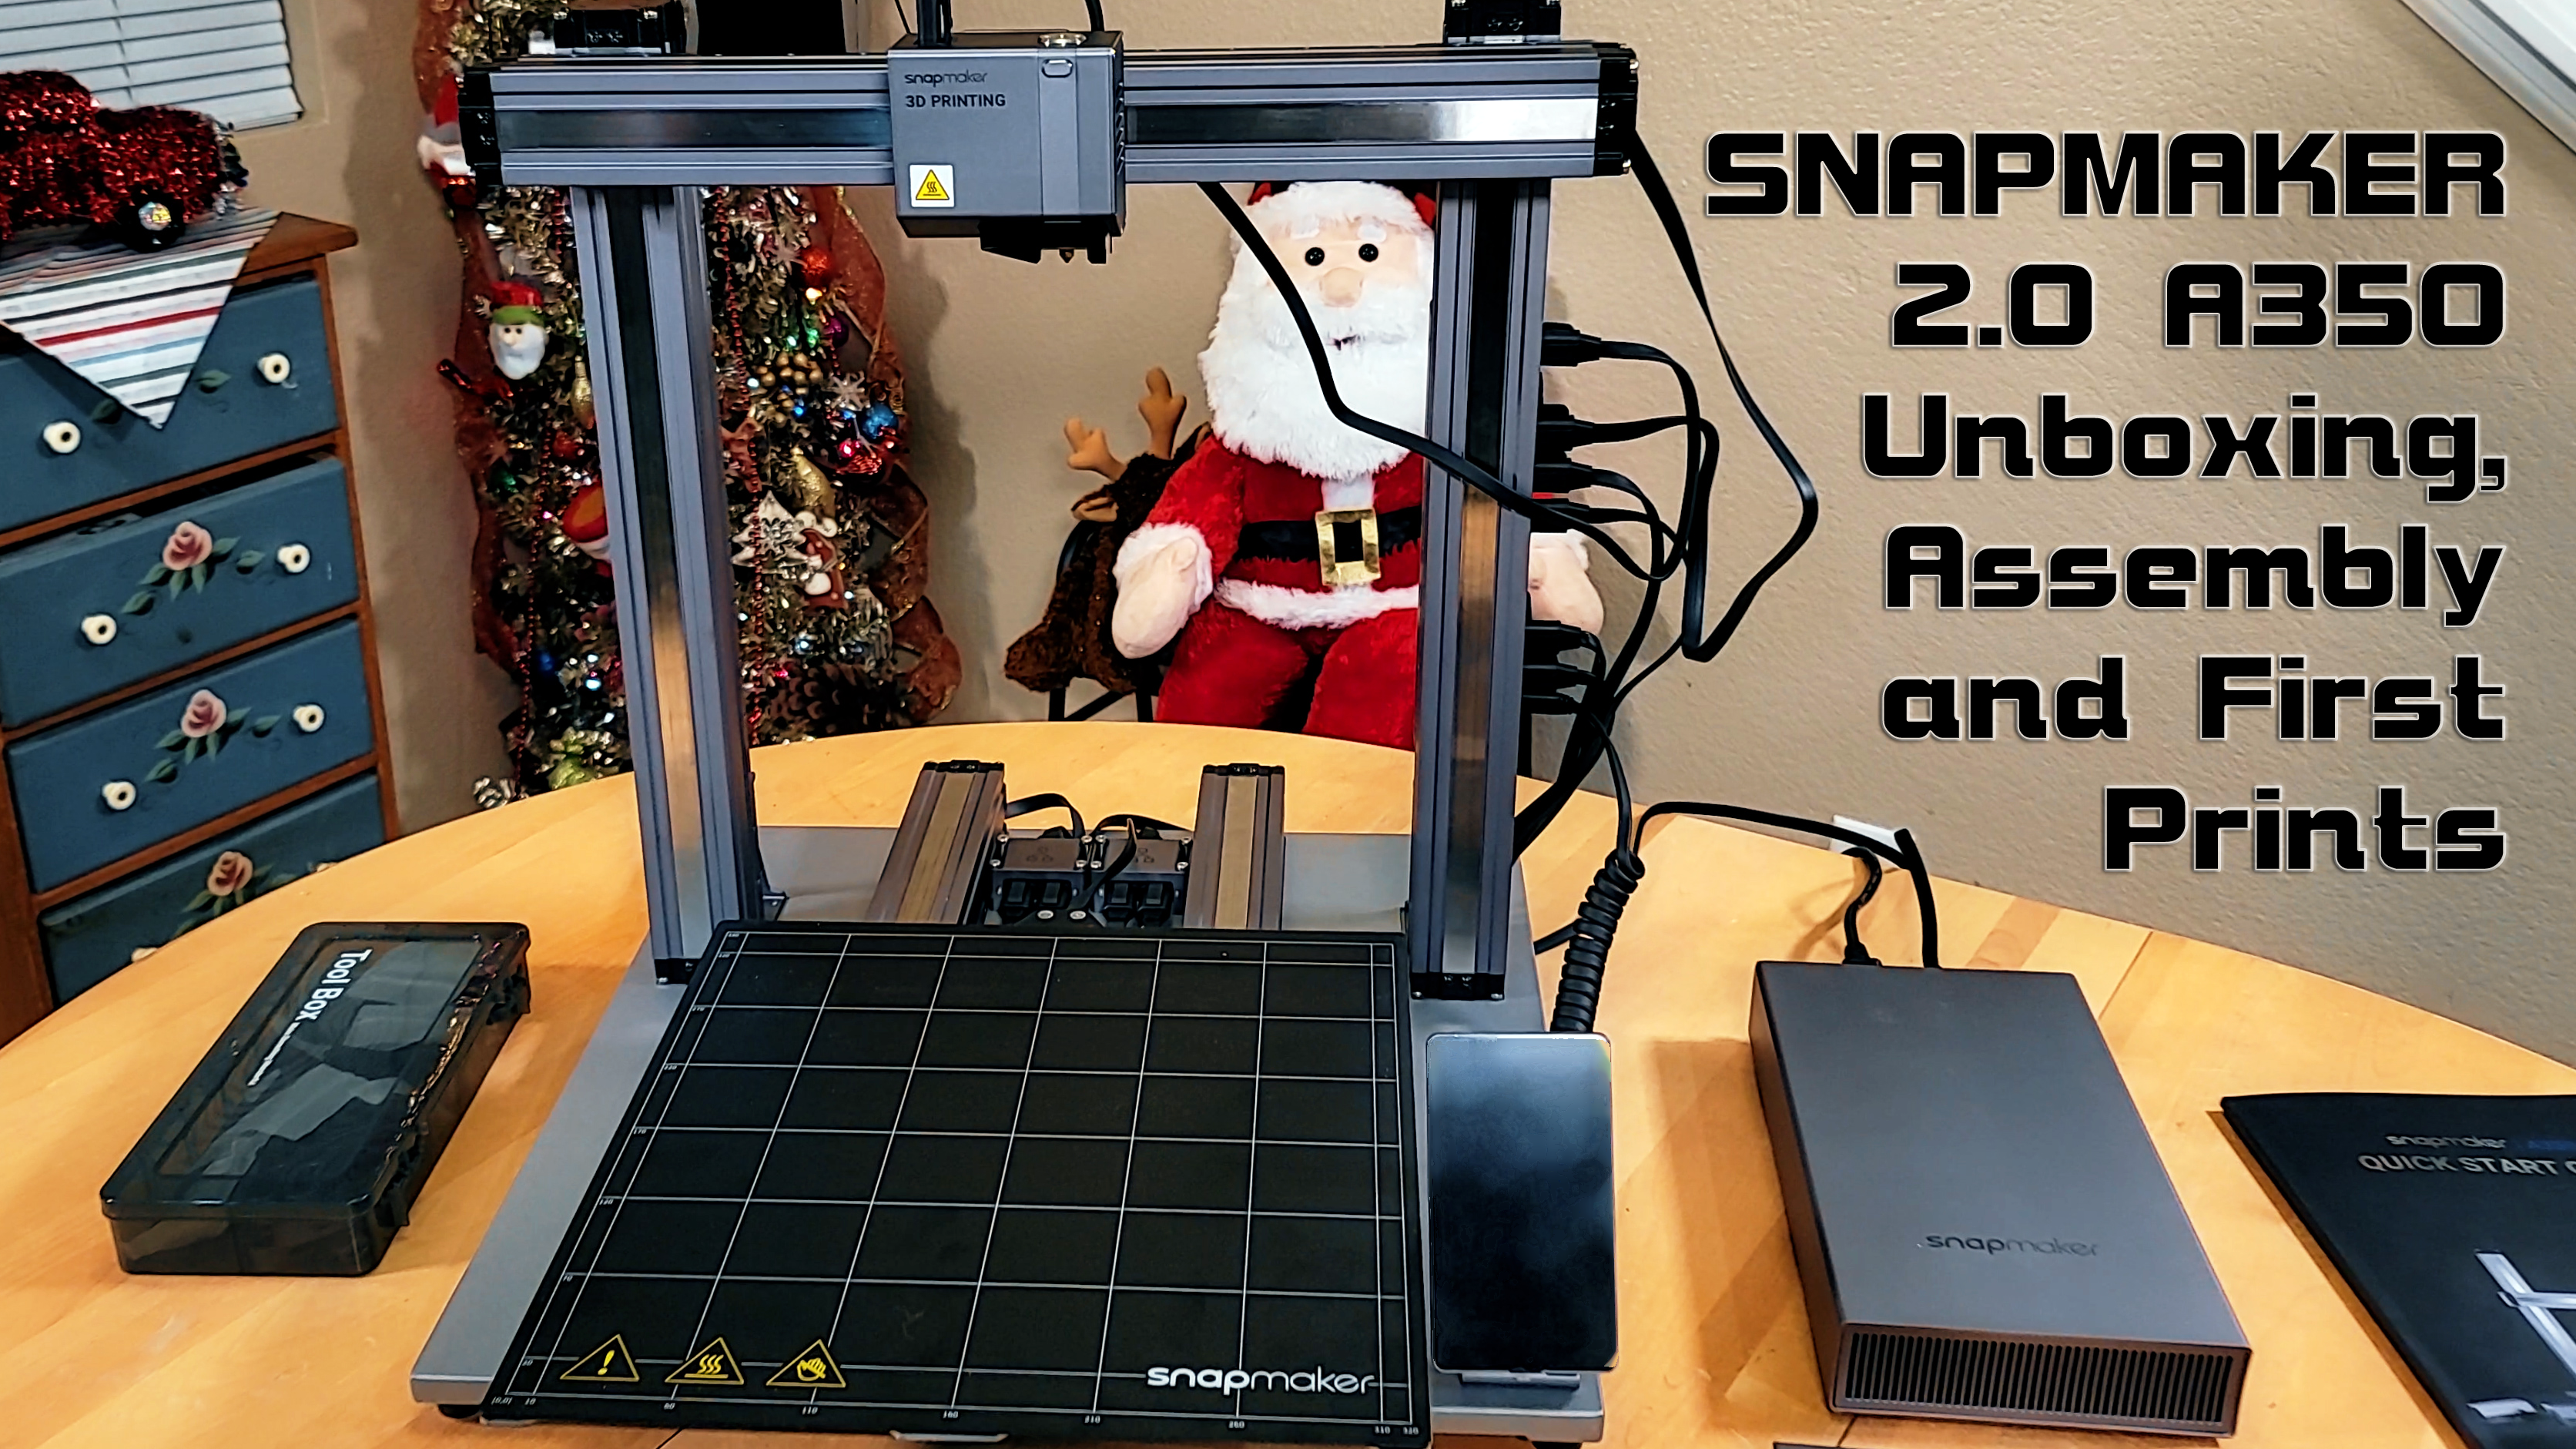 Unboxing the new Snapmaker 2.0 A350 3D Printer, Laser, CNC